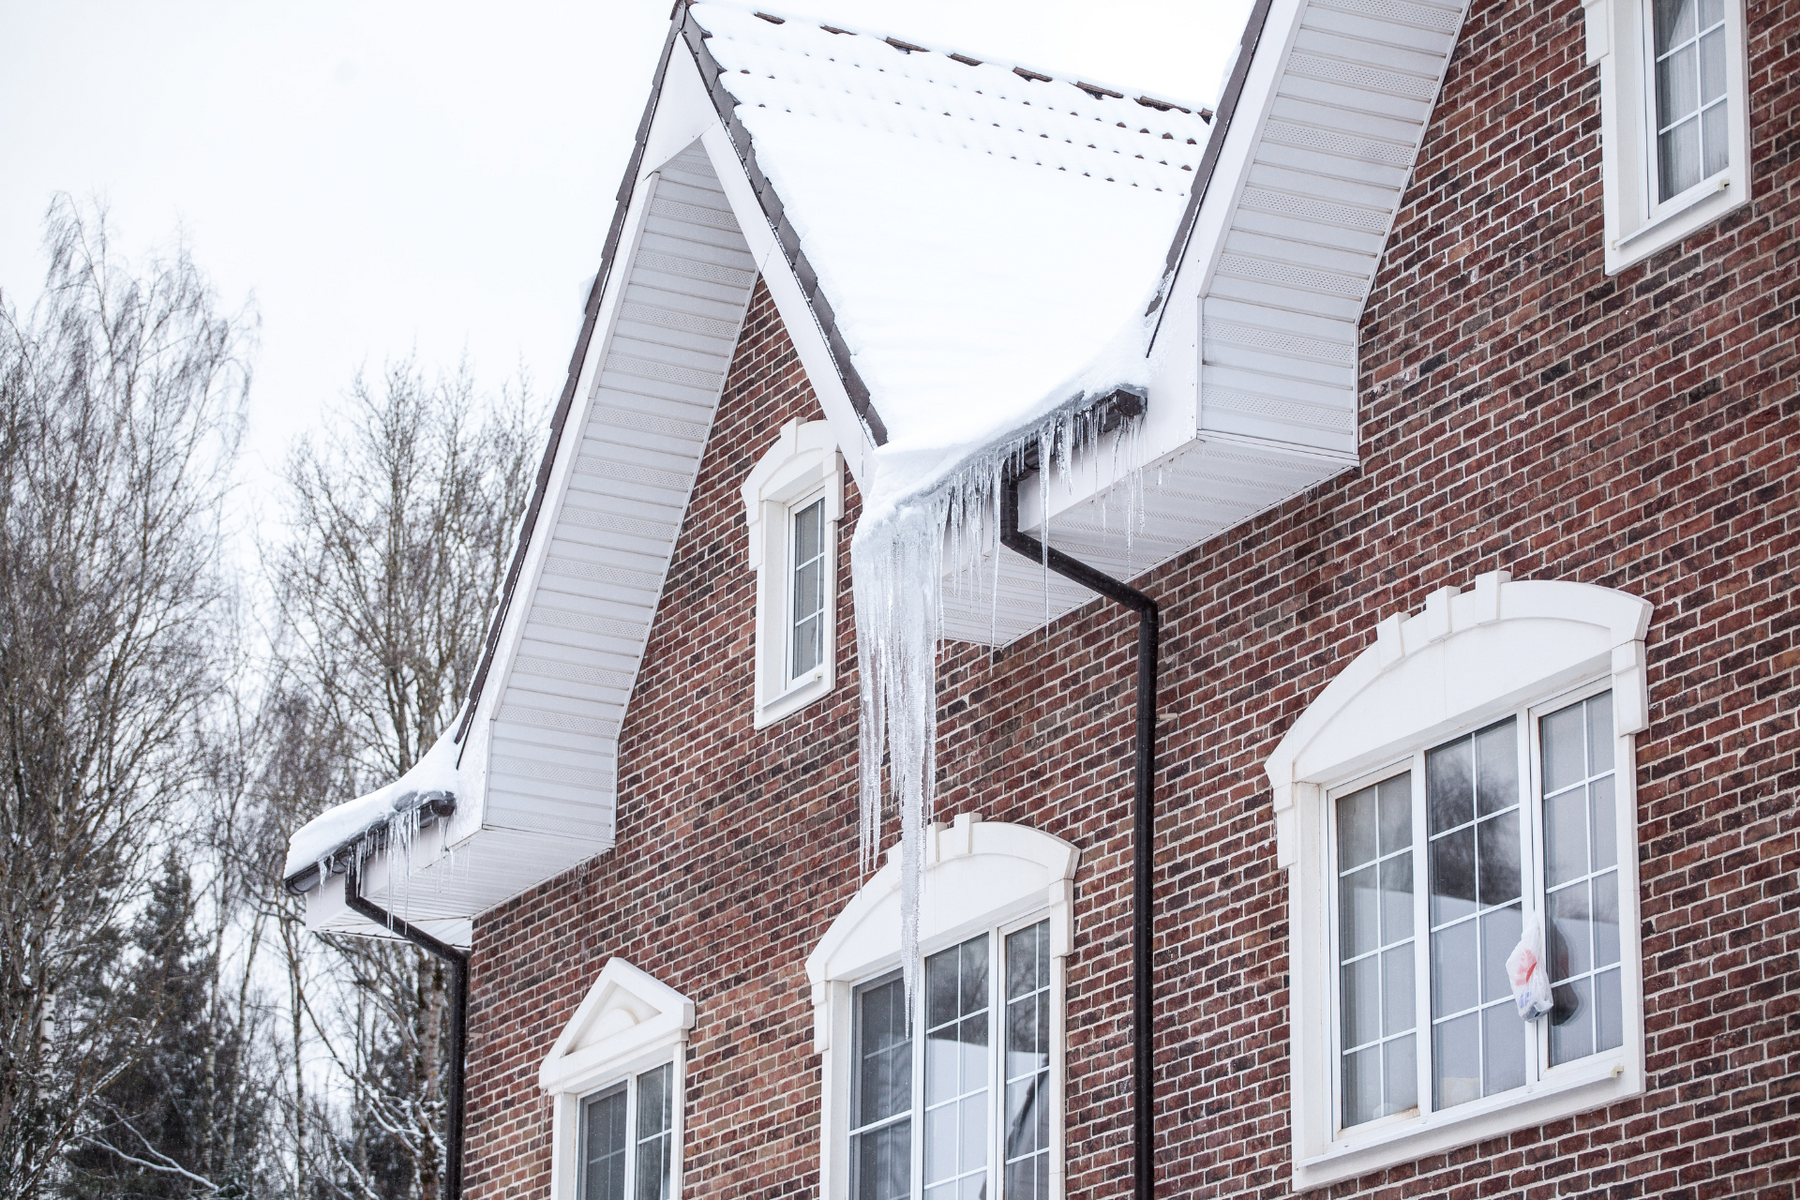 A home in the winter covered in snow and icicles